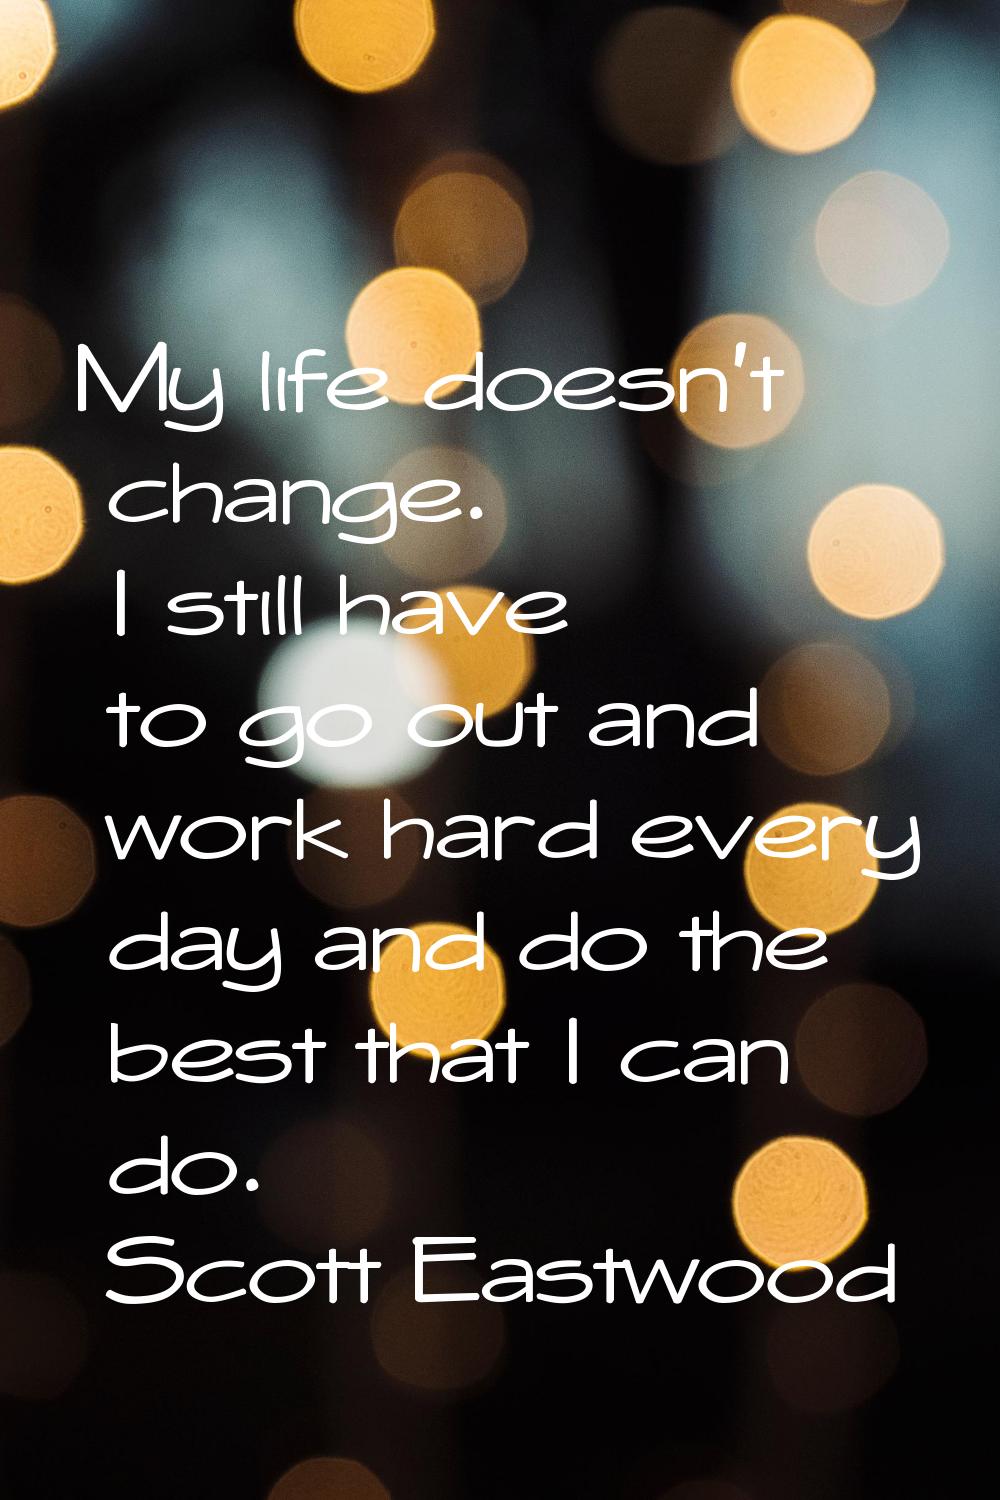 My life doesn't change. I still have to go out and work hard every day and do the best that I can d